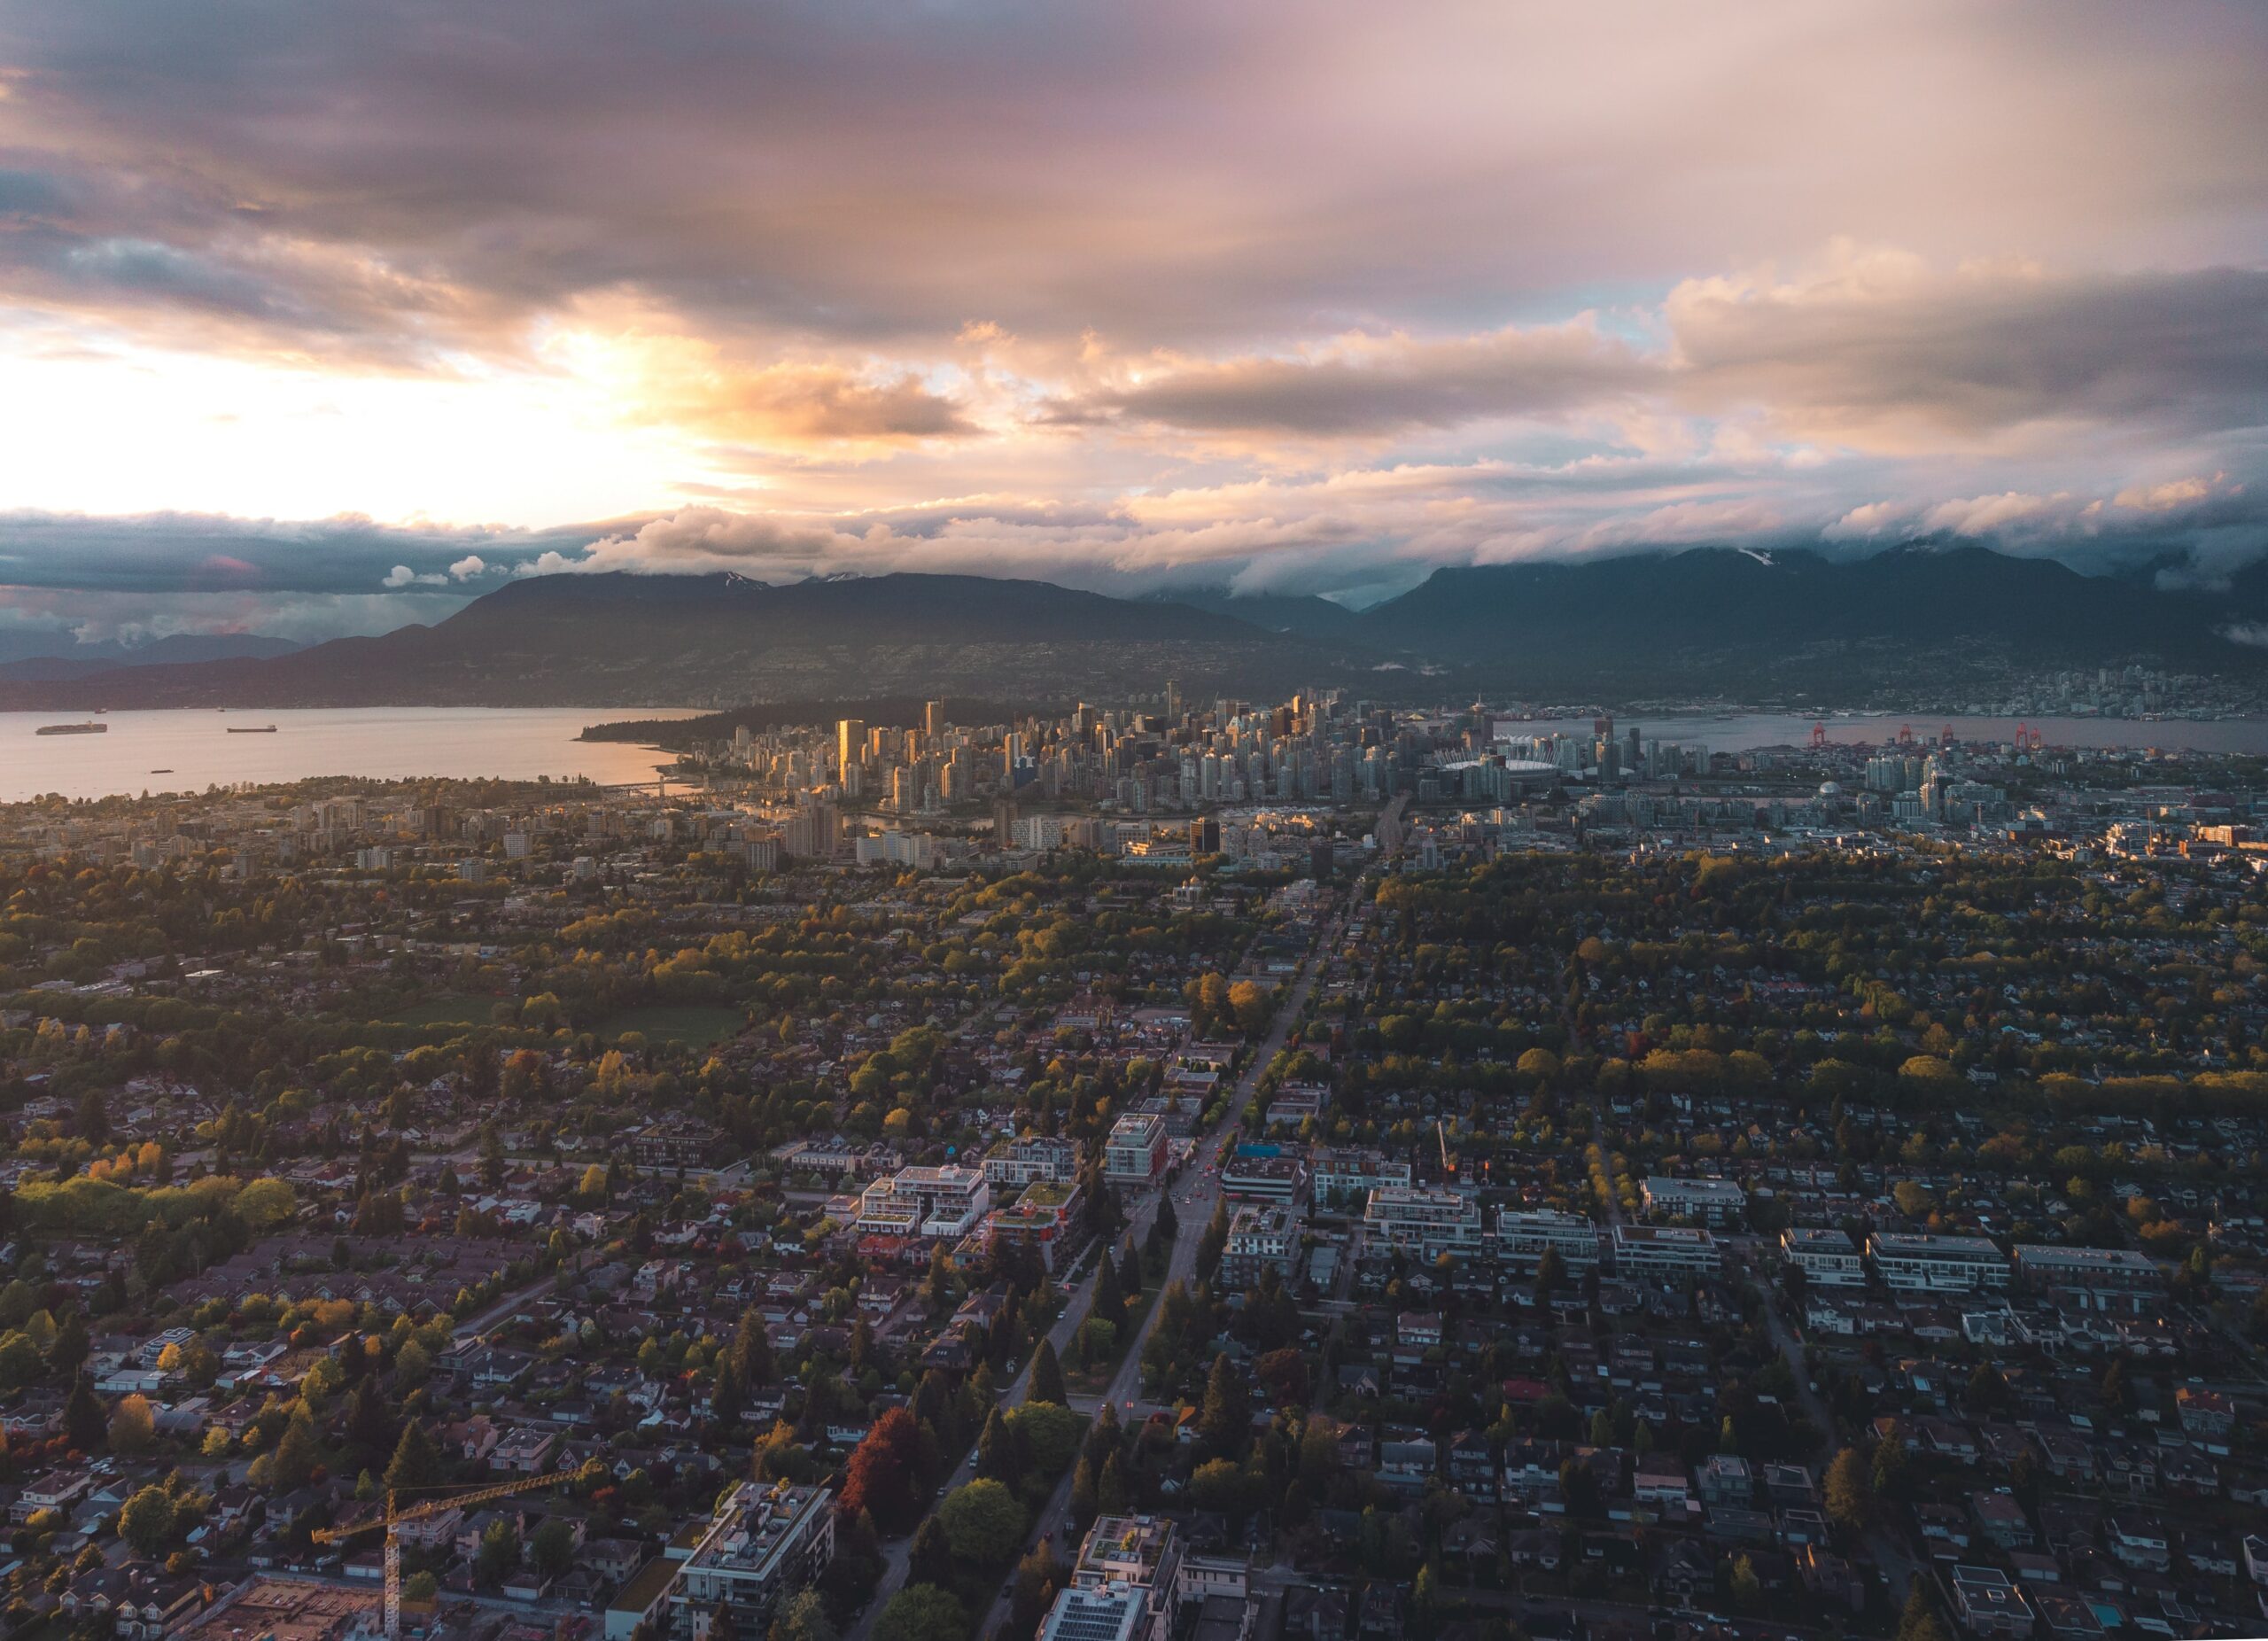 The photo shows the city of Vancouver from an aerial view. The city is in front of mountains and surrounded by water. The suburbs of Vancouver stretch towards the camera.